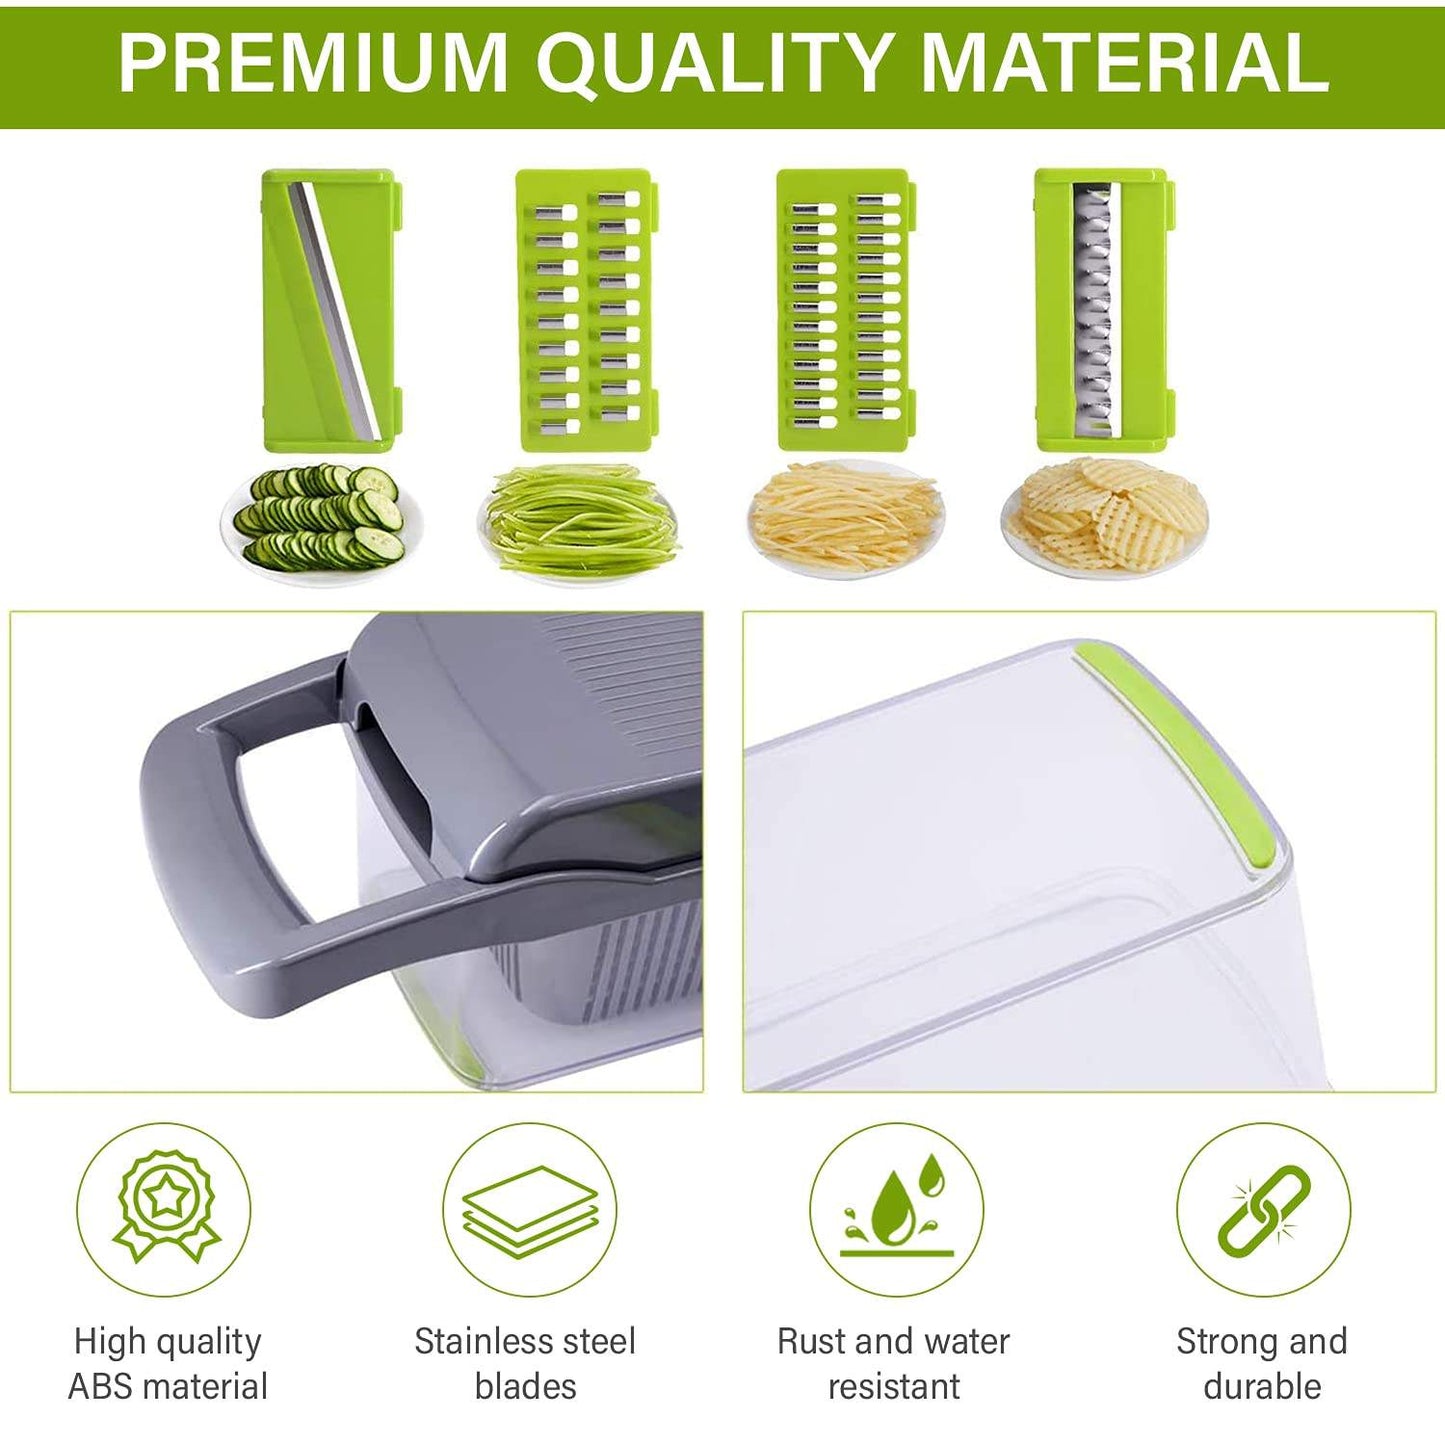 12-in-1 Manual Vegetable Chopper: Efficient Kitchen Gadgets for Food Preparation - Onion Cutter and Vegetable Slicer